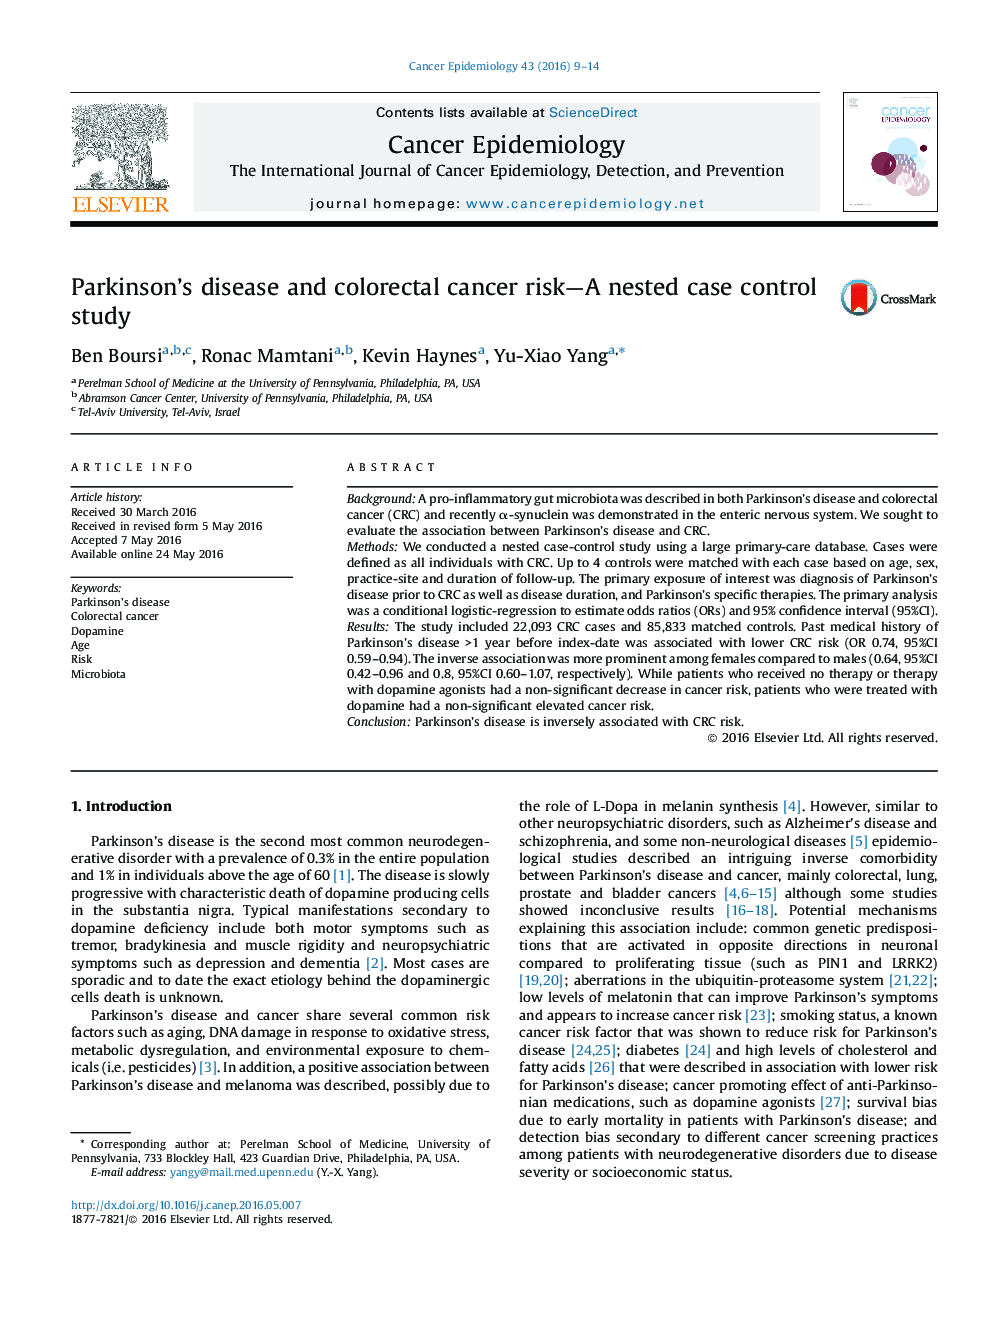 Parkinson’s disease and colorectal cancer risk—A nested case control study